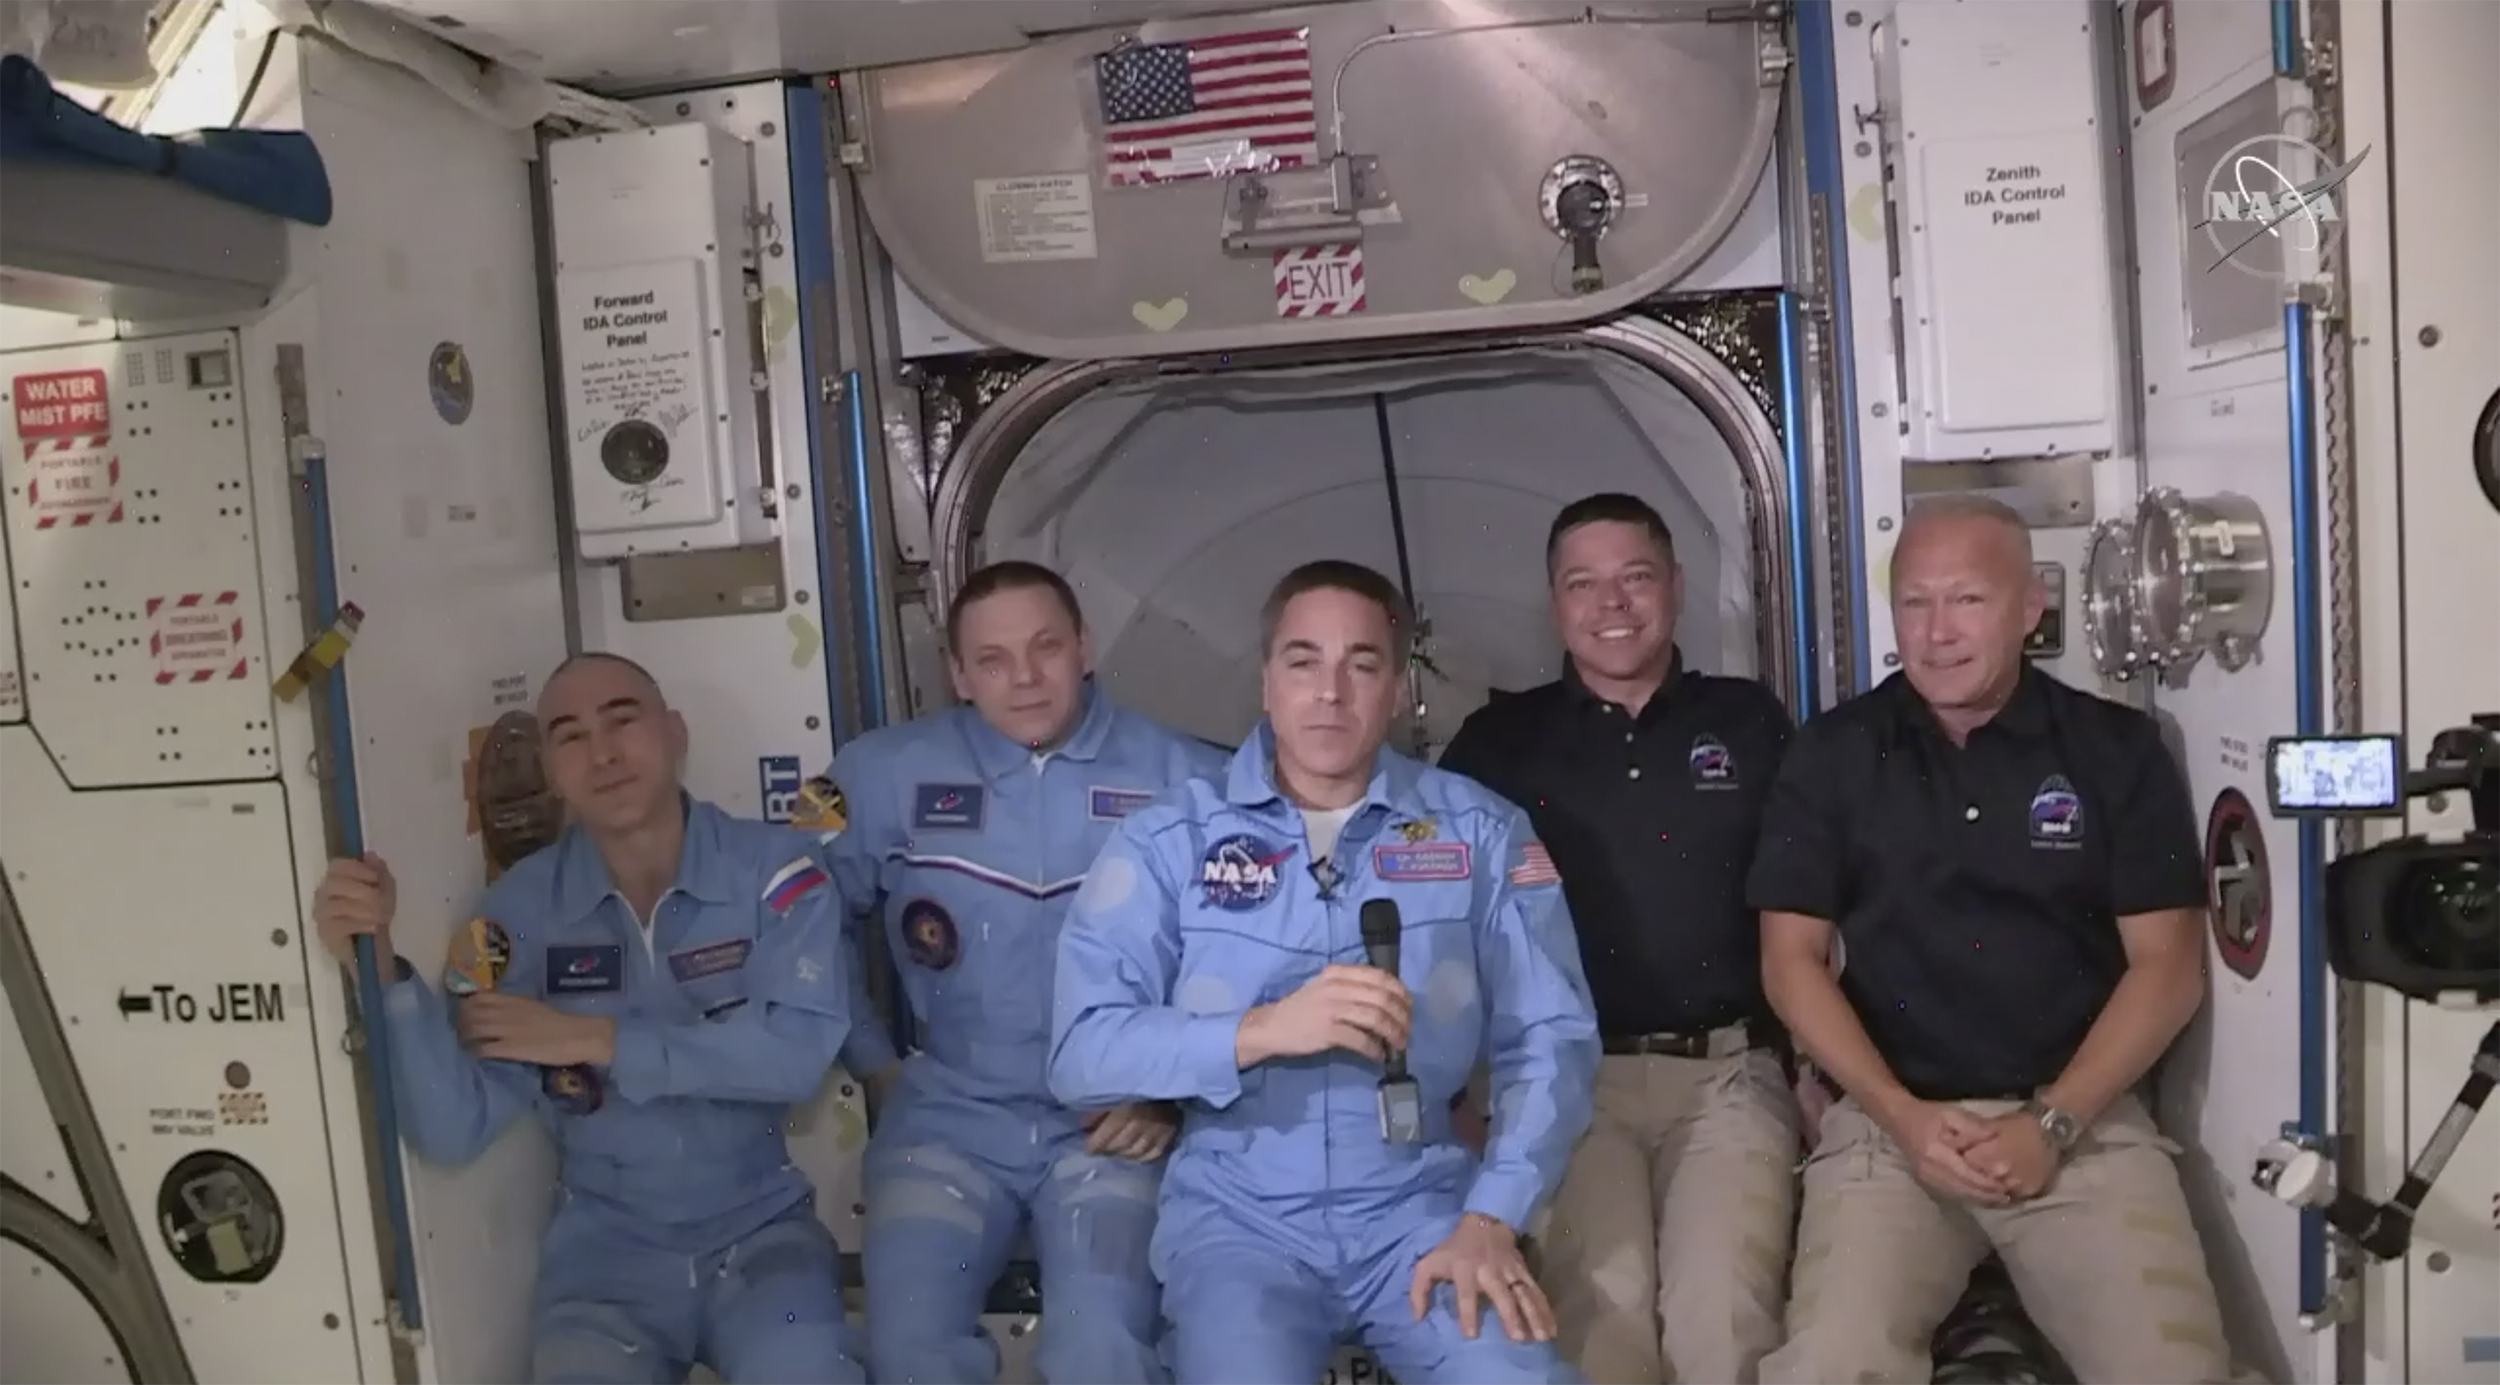 This photo provided by NASA shows Bob Behnken and Doug Hurley, far right, joining the the crew at the International Space Station, after the SpaceX Dragon capsule pulled up to the station and docked Sunday, May 31, 2020.  The Dragon capsule arrived Sunday morning, hours after a historic liftoff from Florida. It's the first time that a privately built and owned spacecraft has delivered a crew to the orbiting lab.(NASA via AP)